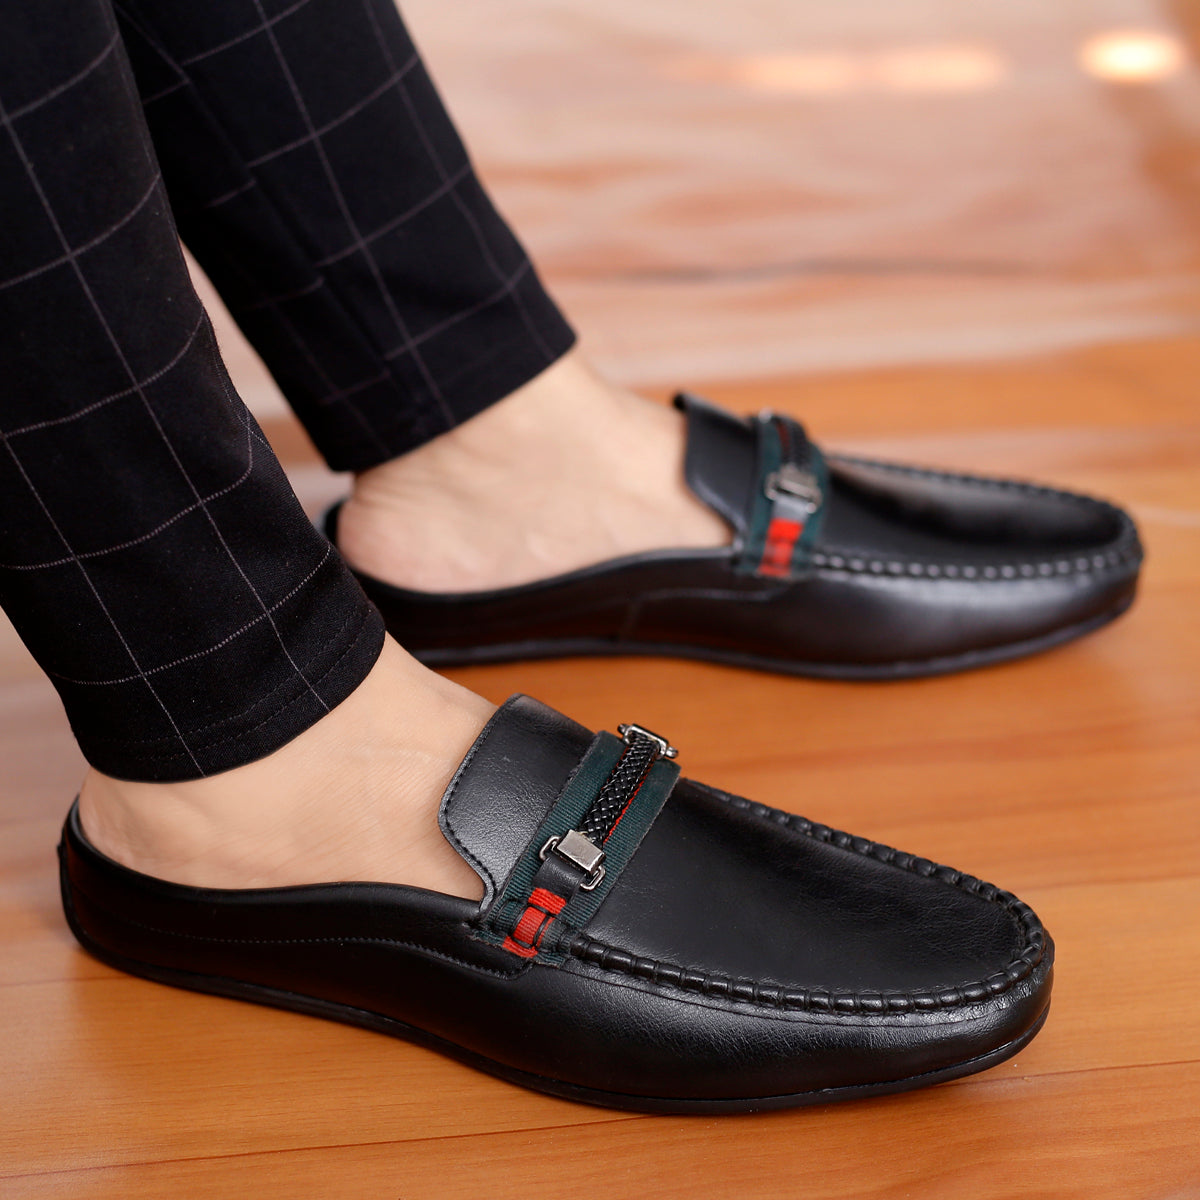 Bacca Bucci JAMBOREE Fashion Mules/Clogs/Backless Loafers for men